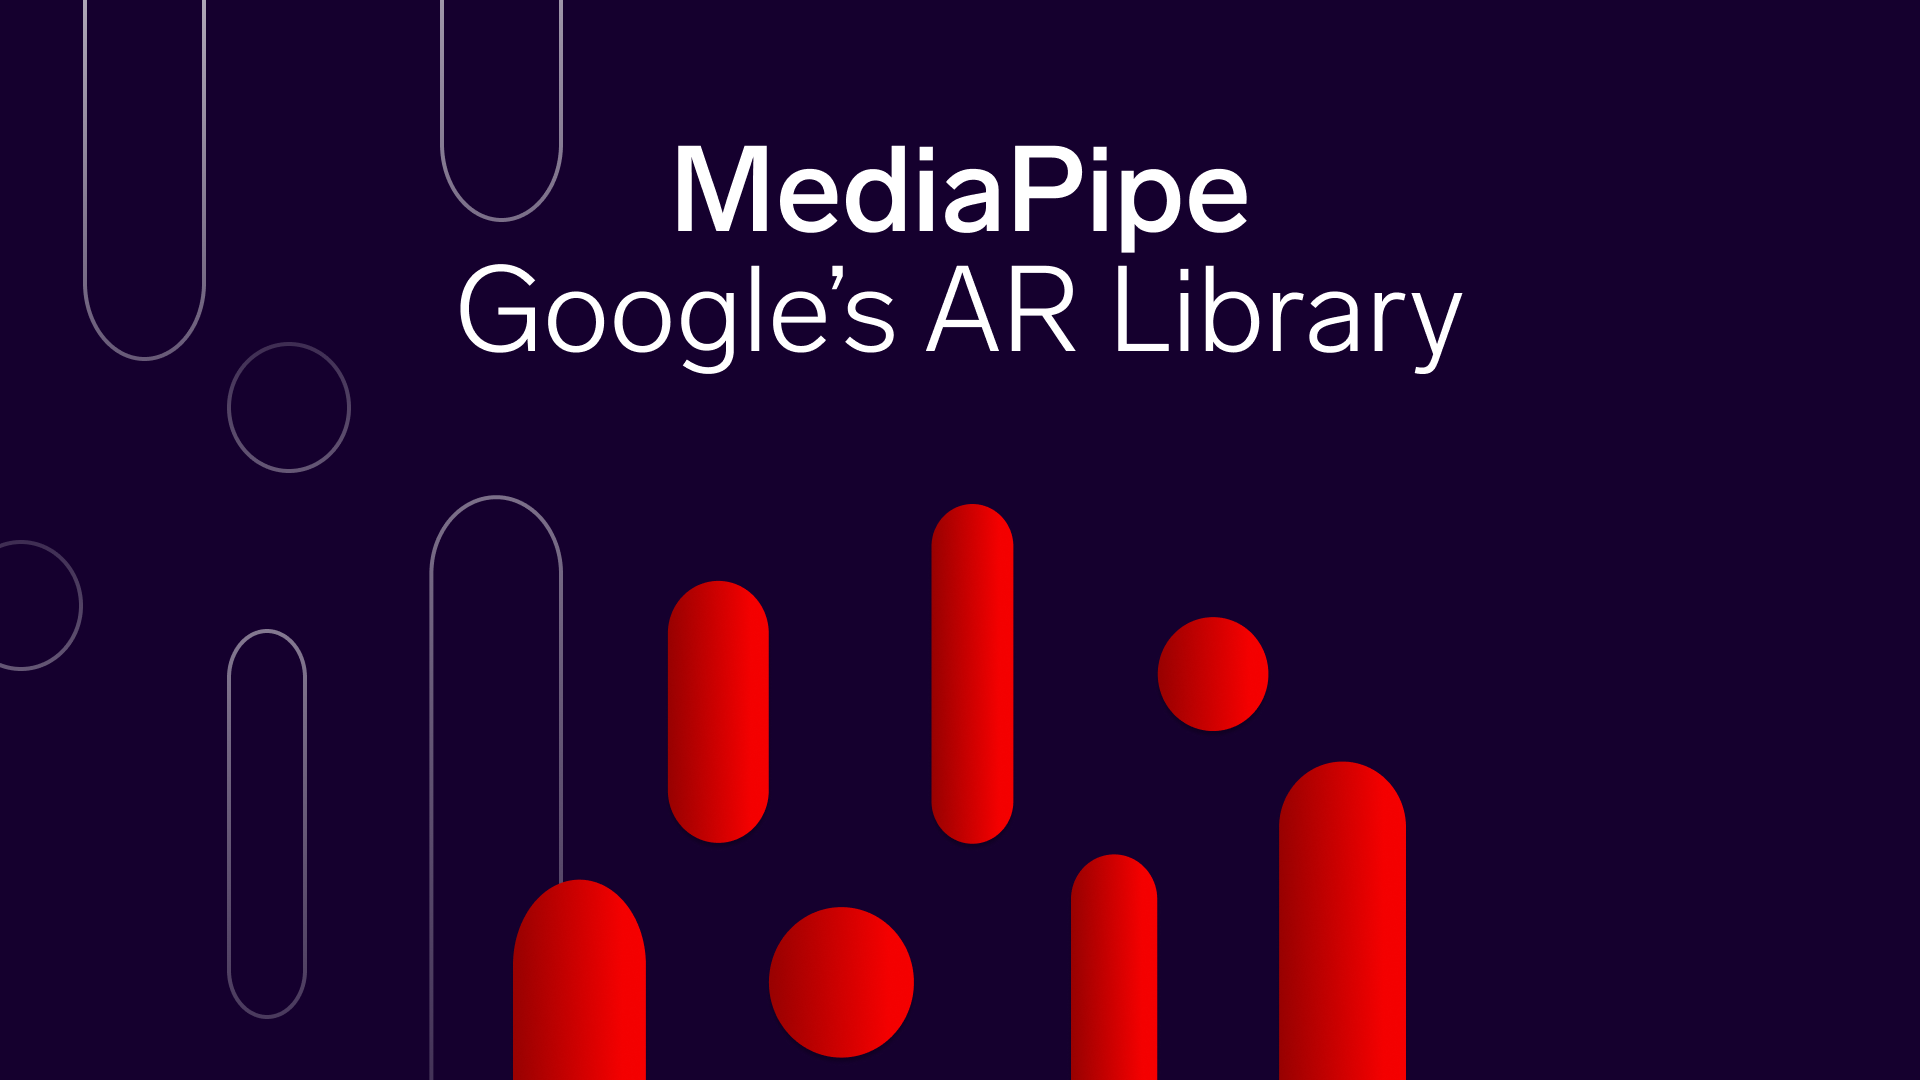 Image saying MediaPipe Google's AR Library